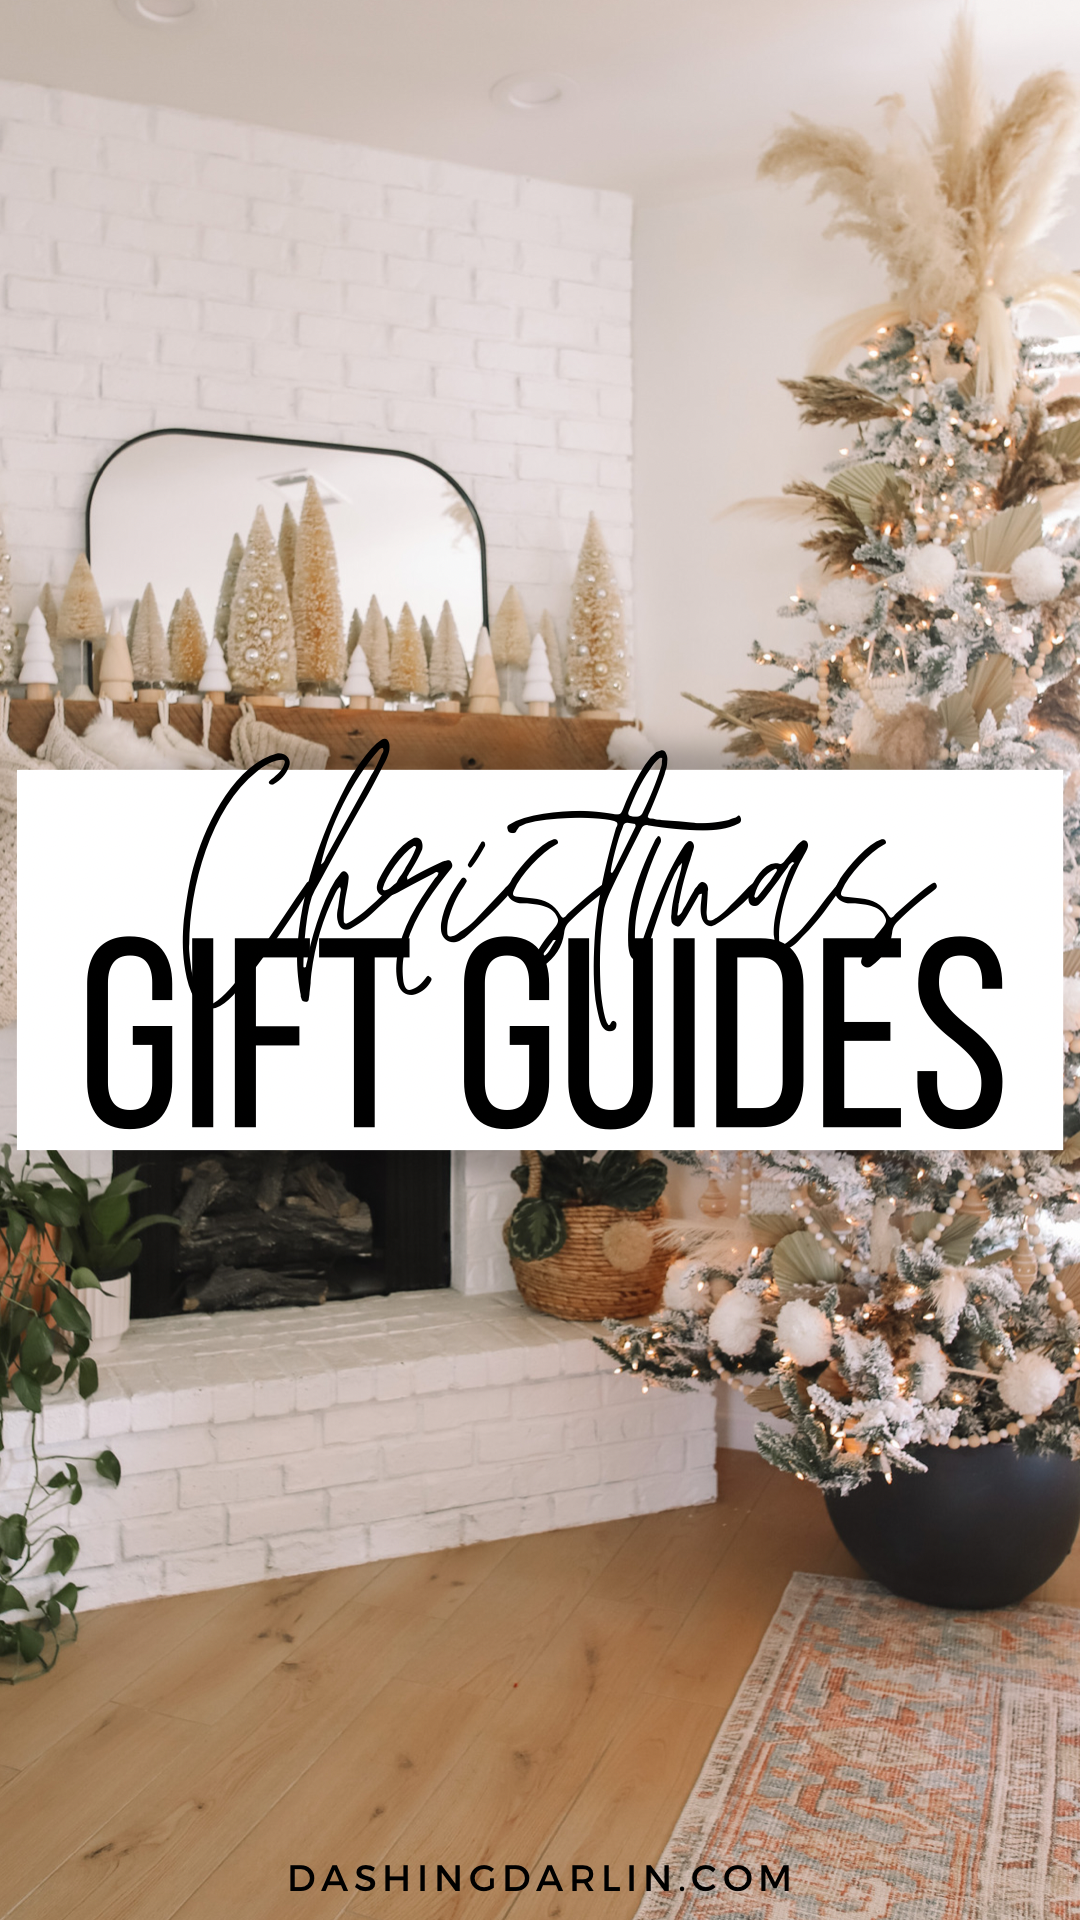 ROUNDING UP TOP GIFT IDEAS FOR ALL OF THE TEENS~ SOMETHING FOR EVERYONE!!